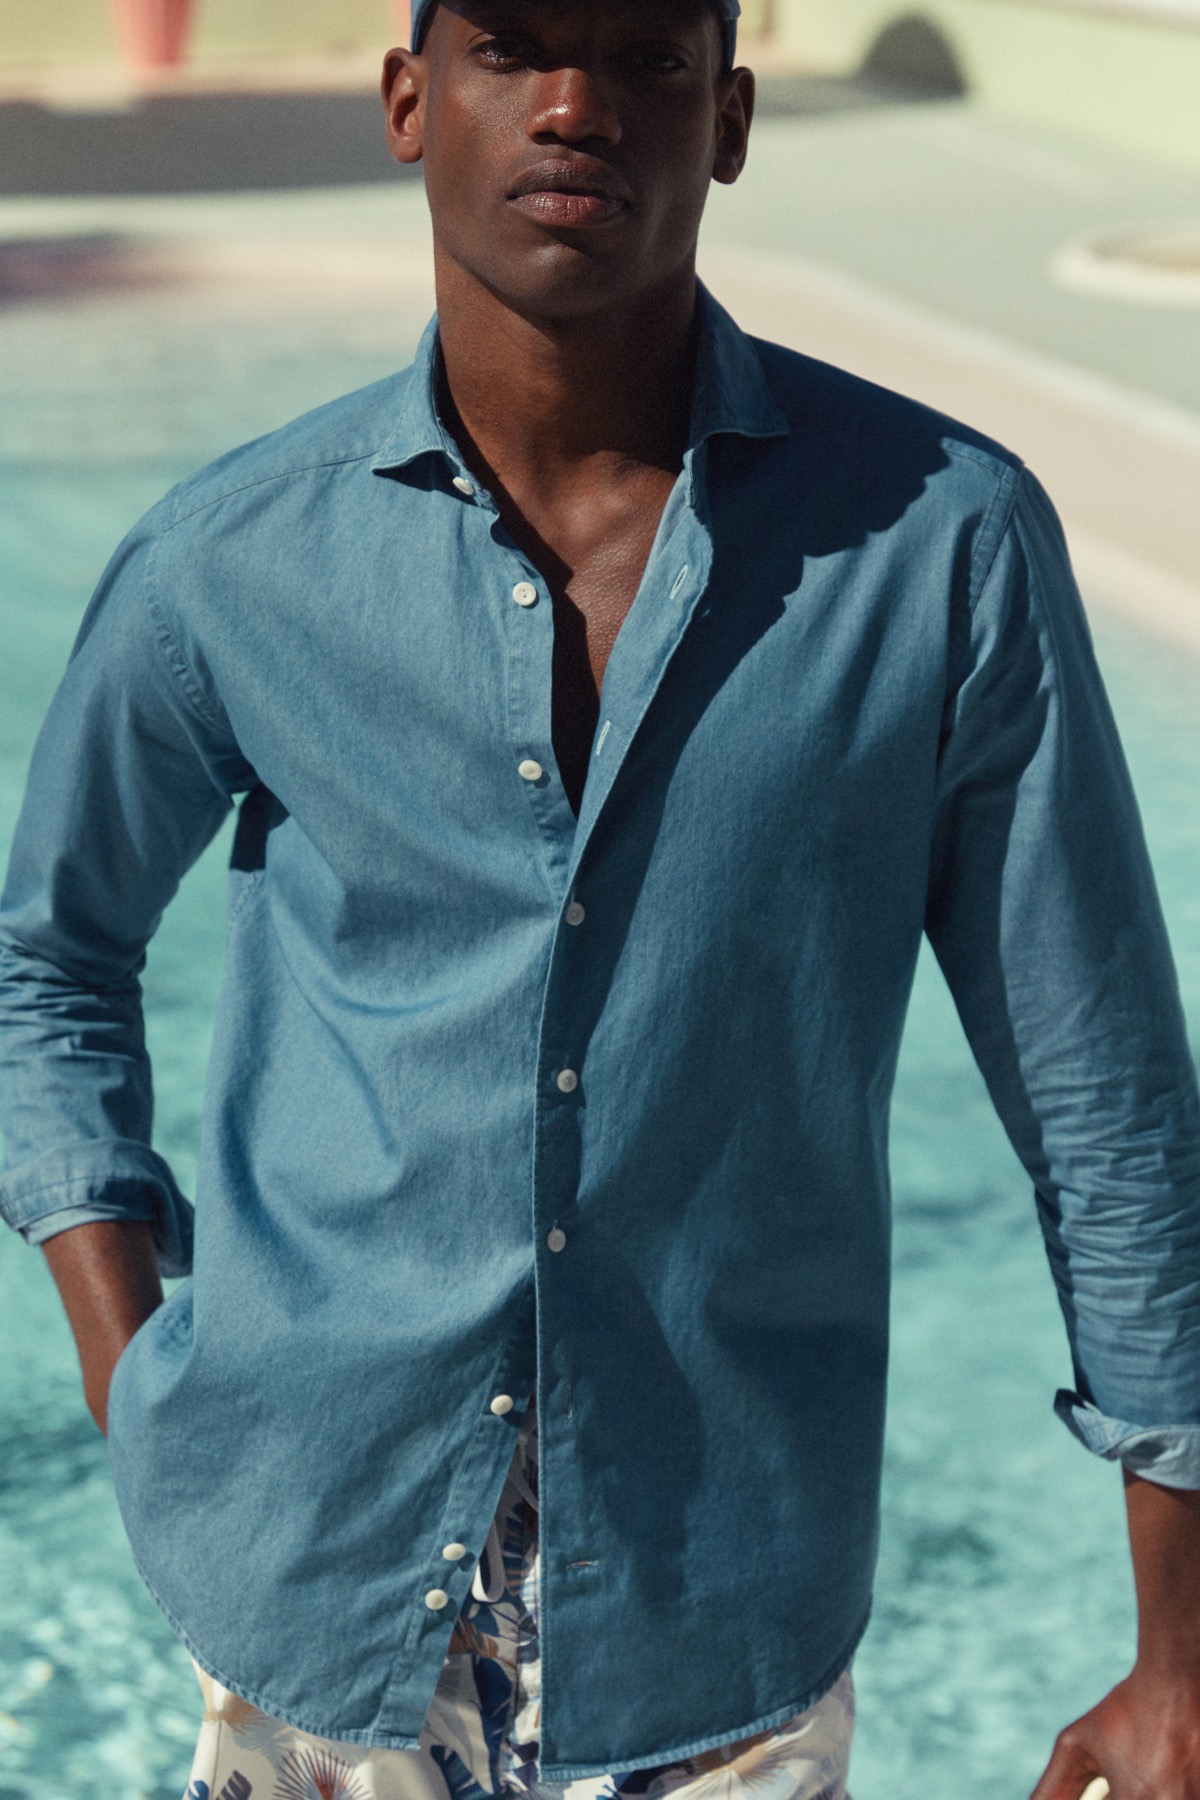 Wardrobe Must-have: 11 Best Types Of Shirts For Men